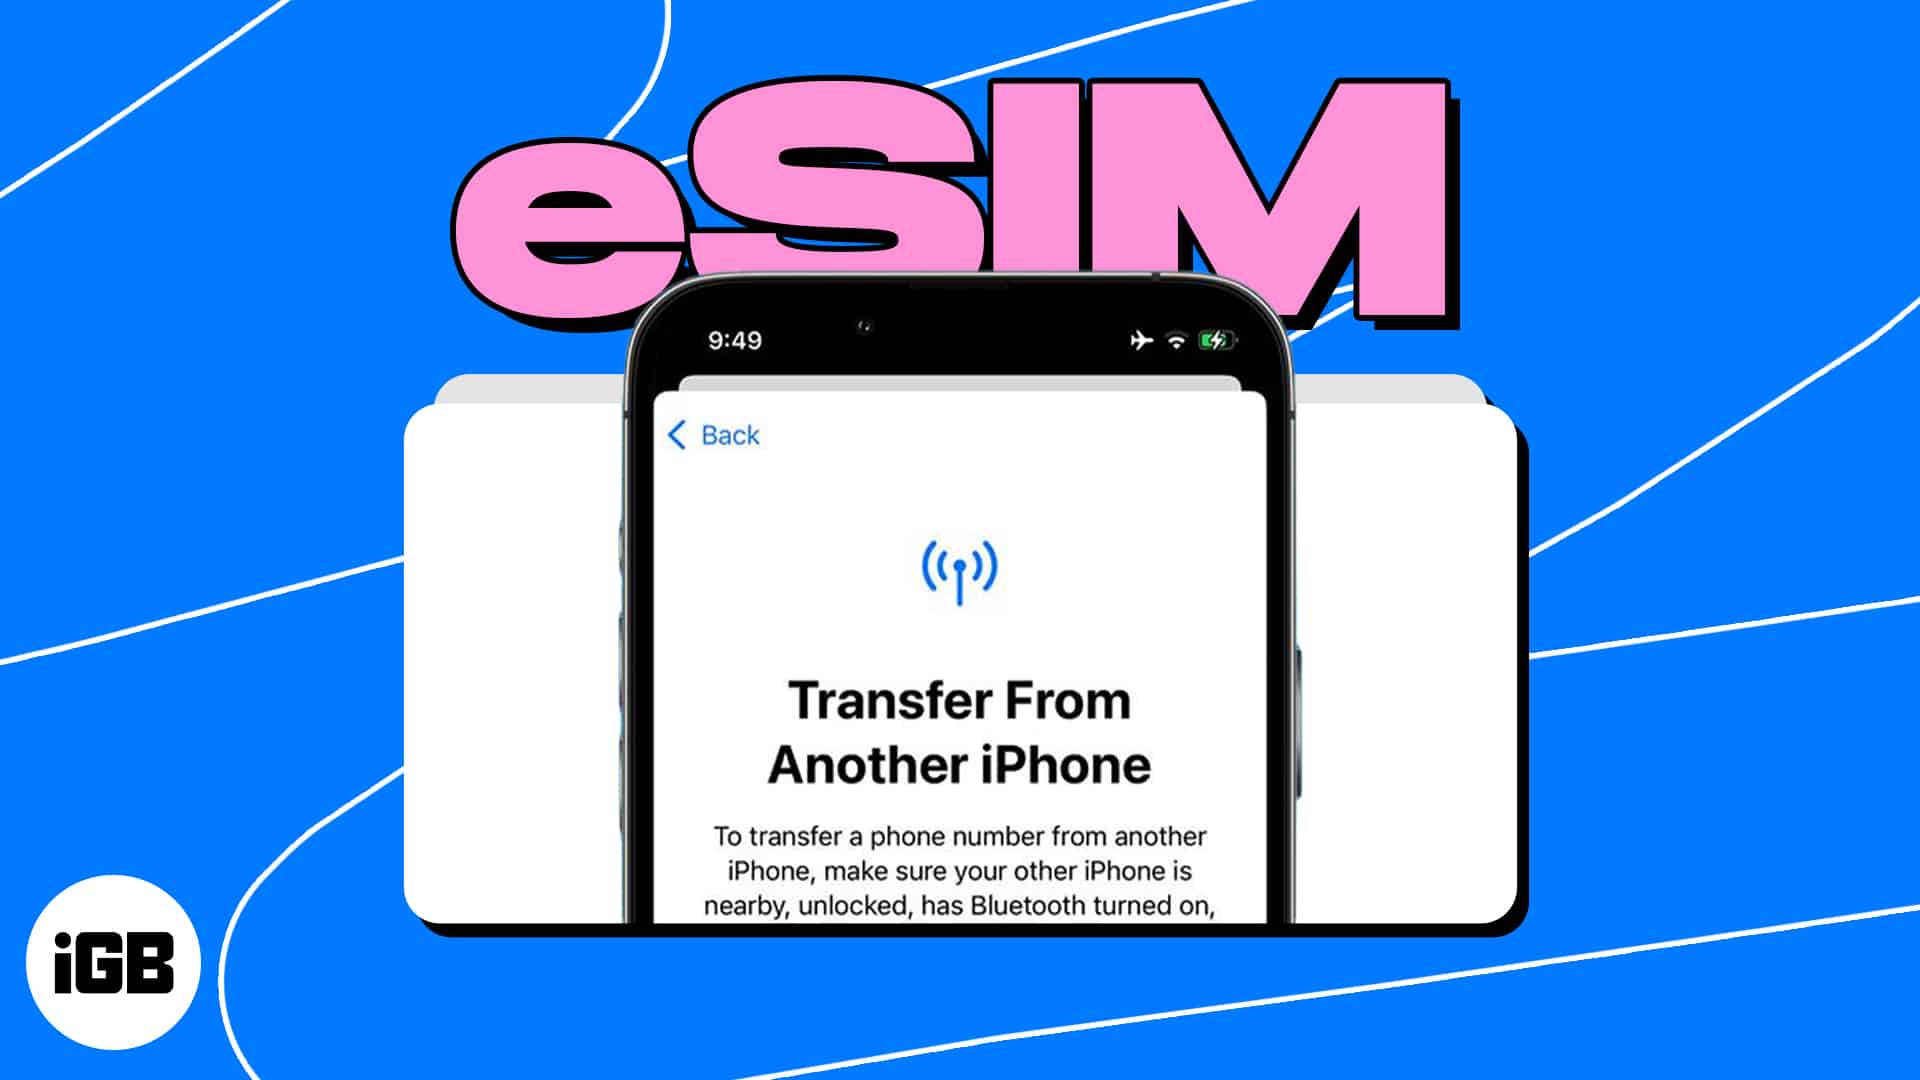 How to transfer esim to new iphone